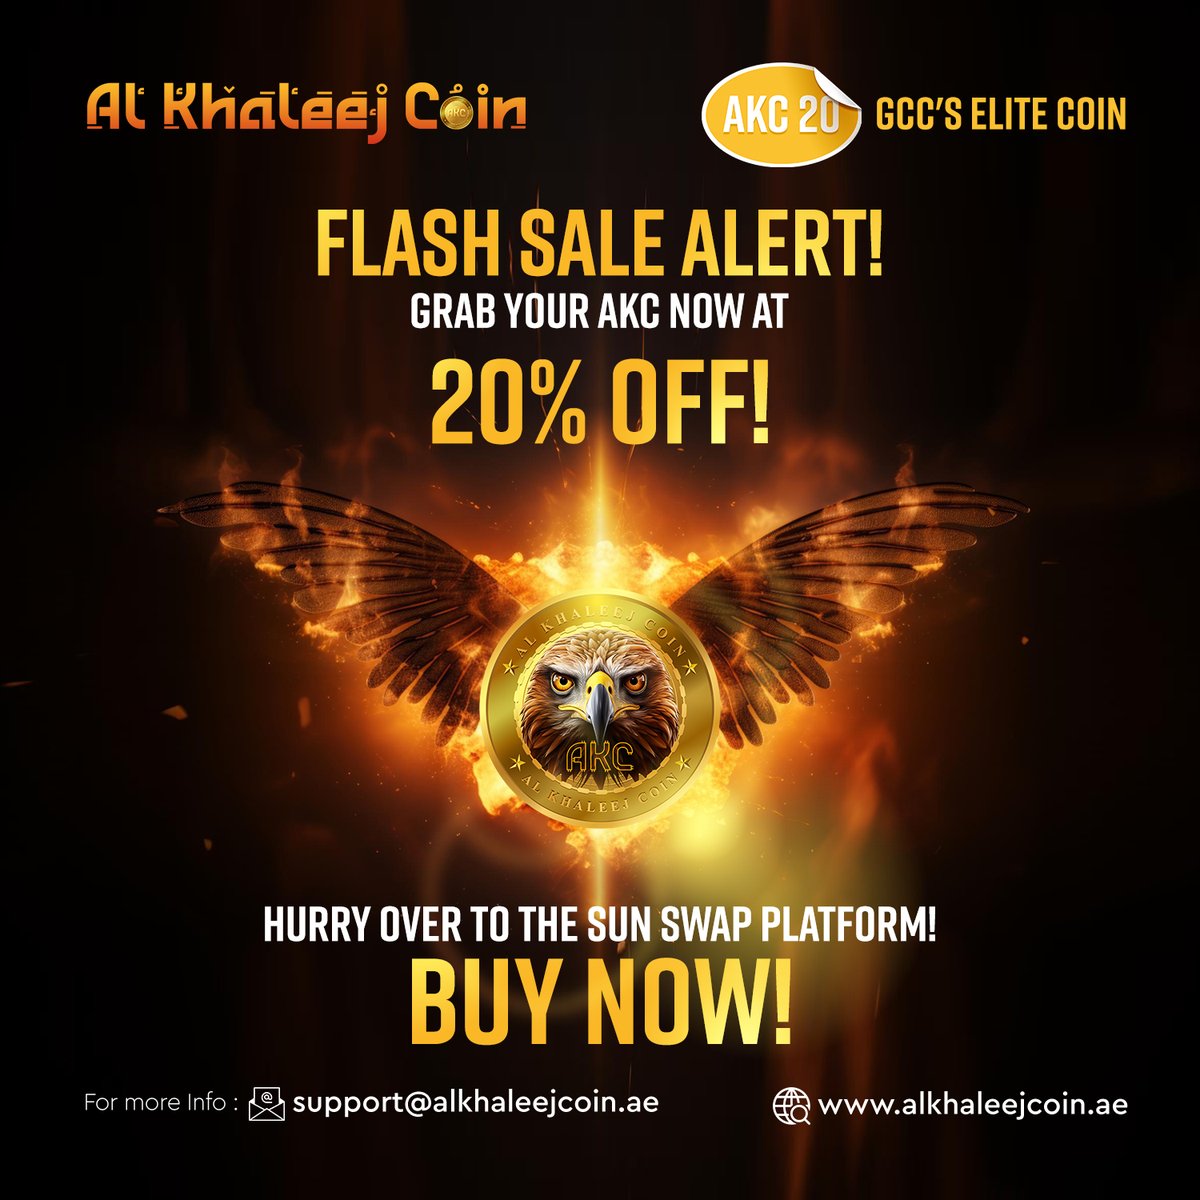 🚀 FLASH SALE ALERT! Grab your AKC now at 20% off! Hurry over to Sun Swap and take advantage of this limited-time offer! BUY NOW! 💼💰 #AKC #FlashSale #SunSwap #alkhaleejcoin #gcccoin #elitecoin